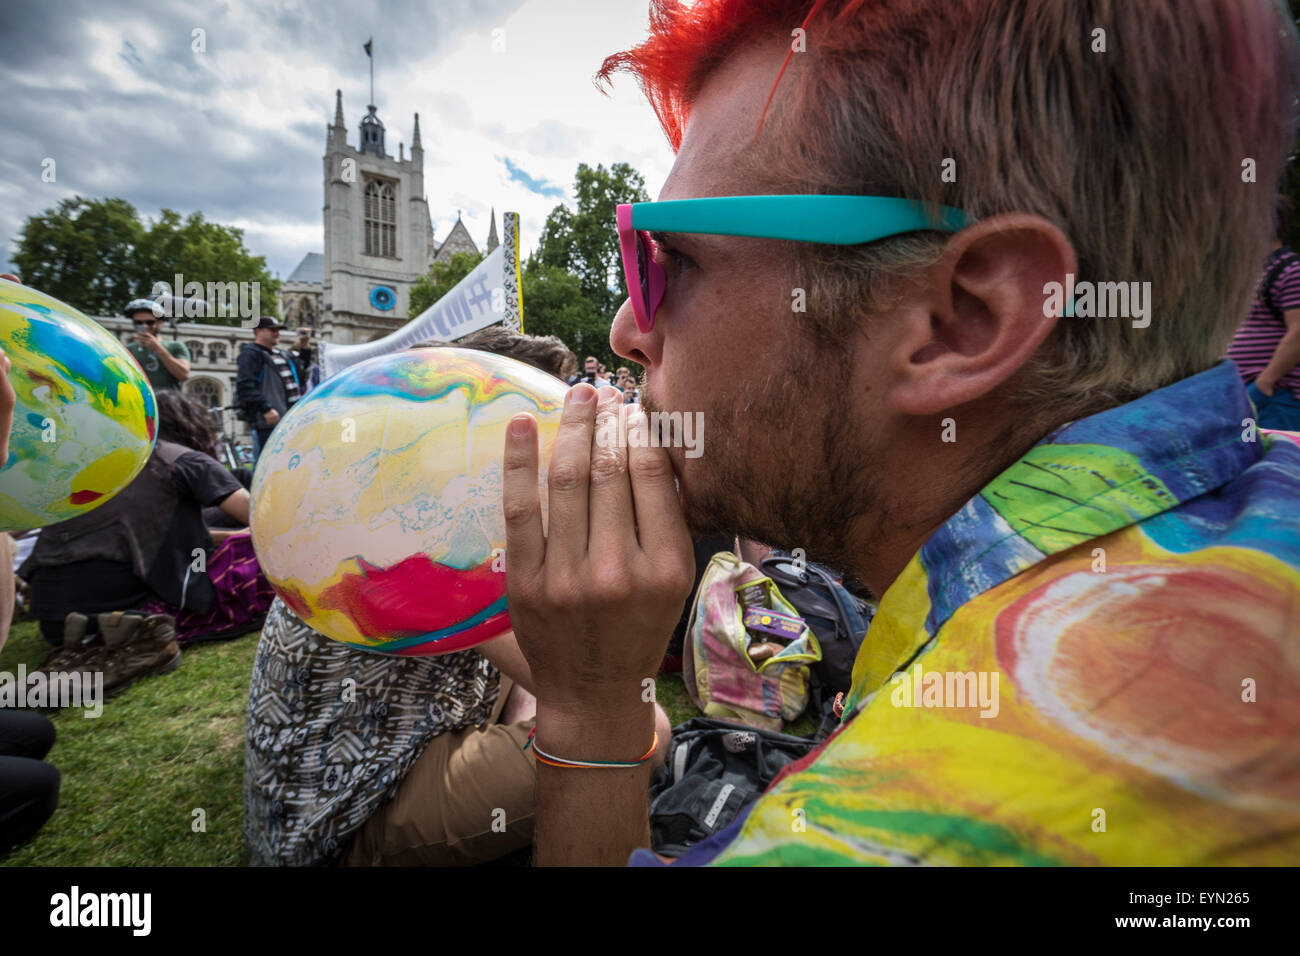 London, UK. 1st August, 2015. Campaigners inhale balloons inflated with nitrous oxide, commonly known as “laughing gas” to get high during a protest in Westminster’s Parliament Square against a proposed bill that aims to make selling any psychoactive substance illegal. Credit: Guy Corbishley/Alamy Live News Stock Photo